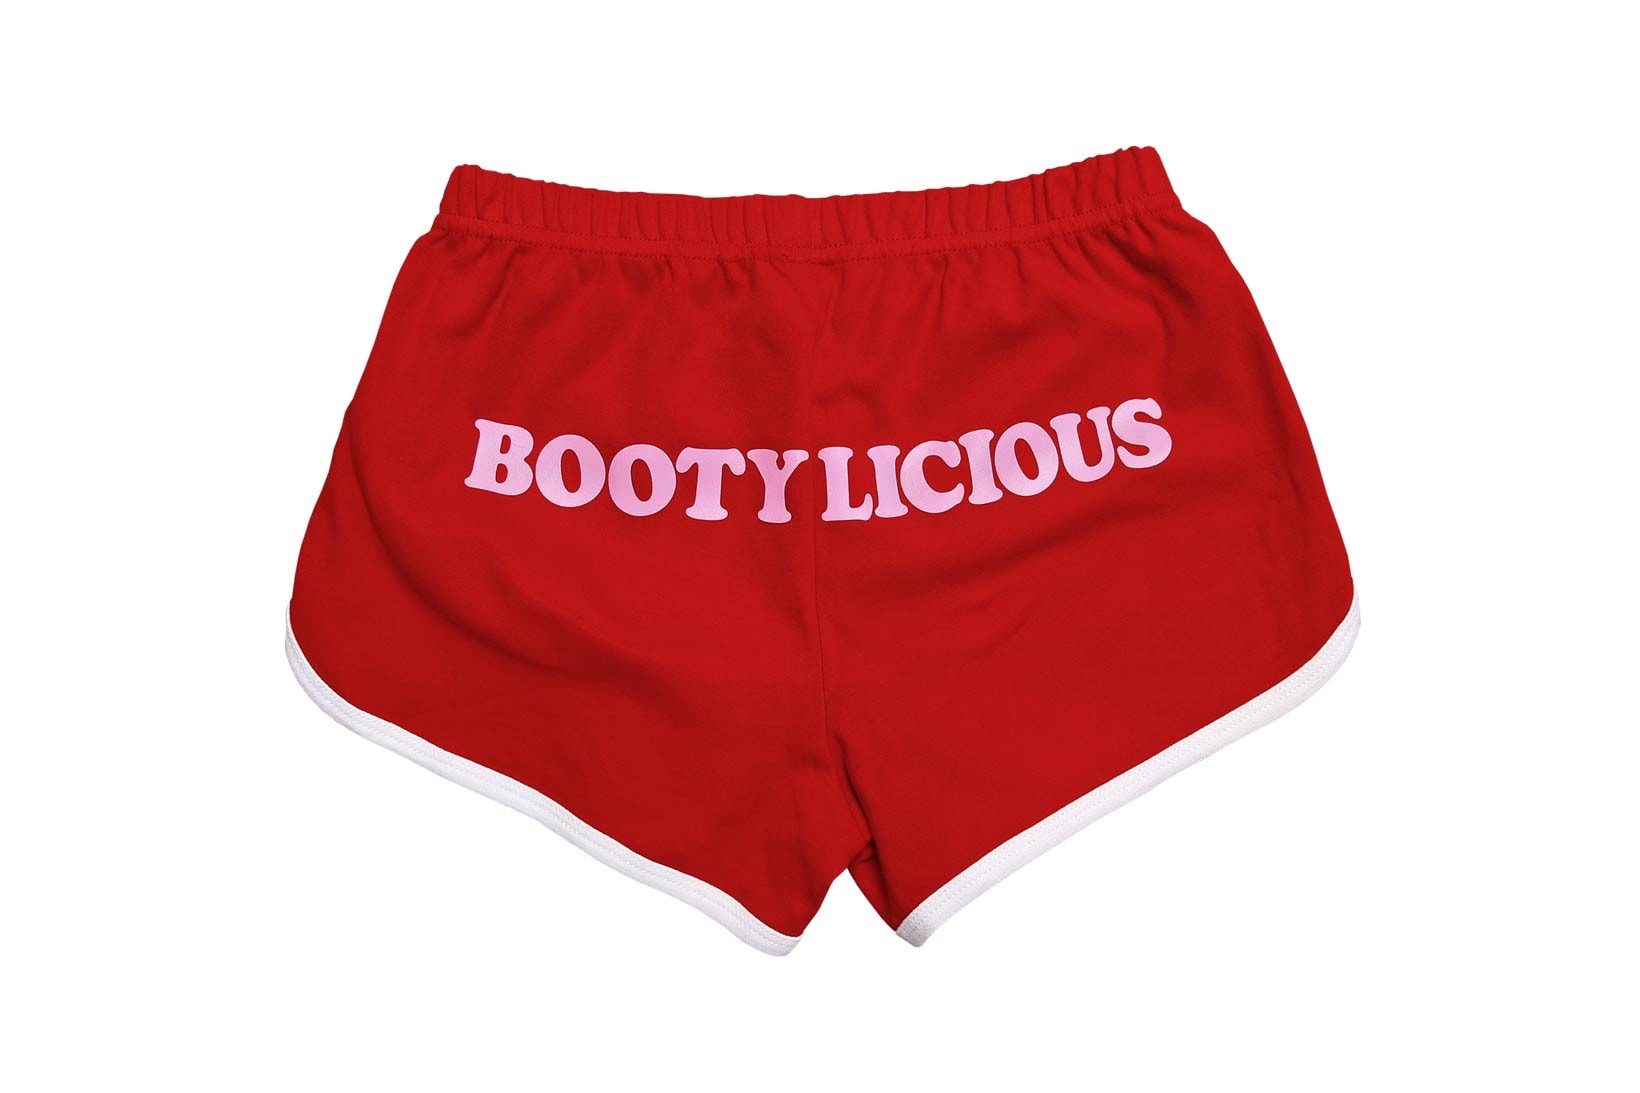 Beyonce Valentine's Day Bootylicious Shorts Red